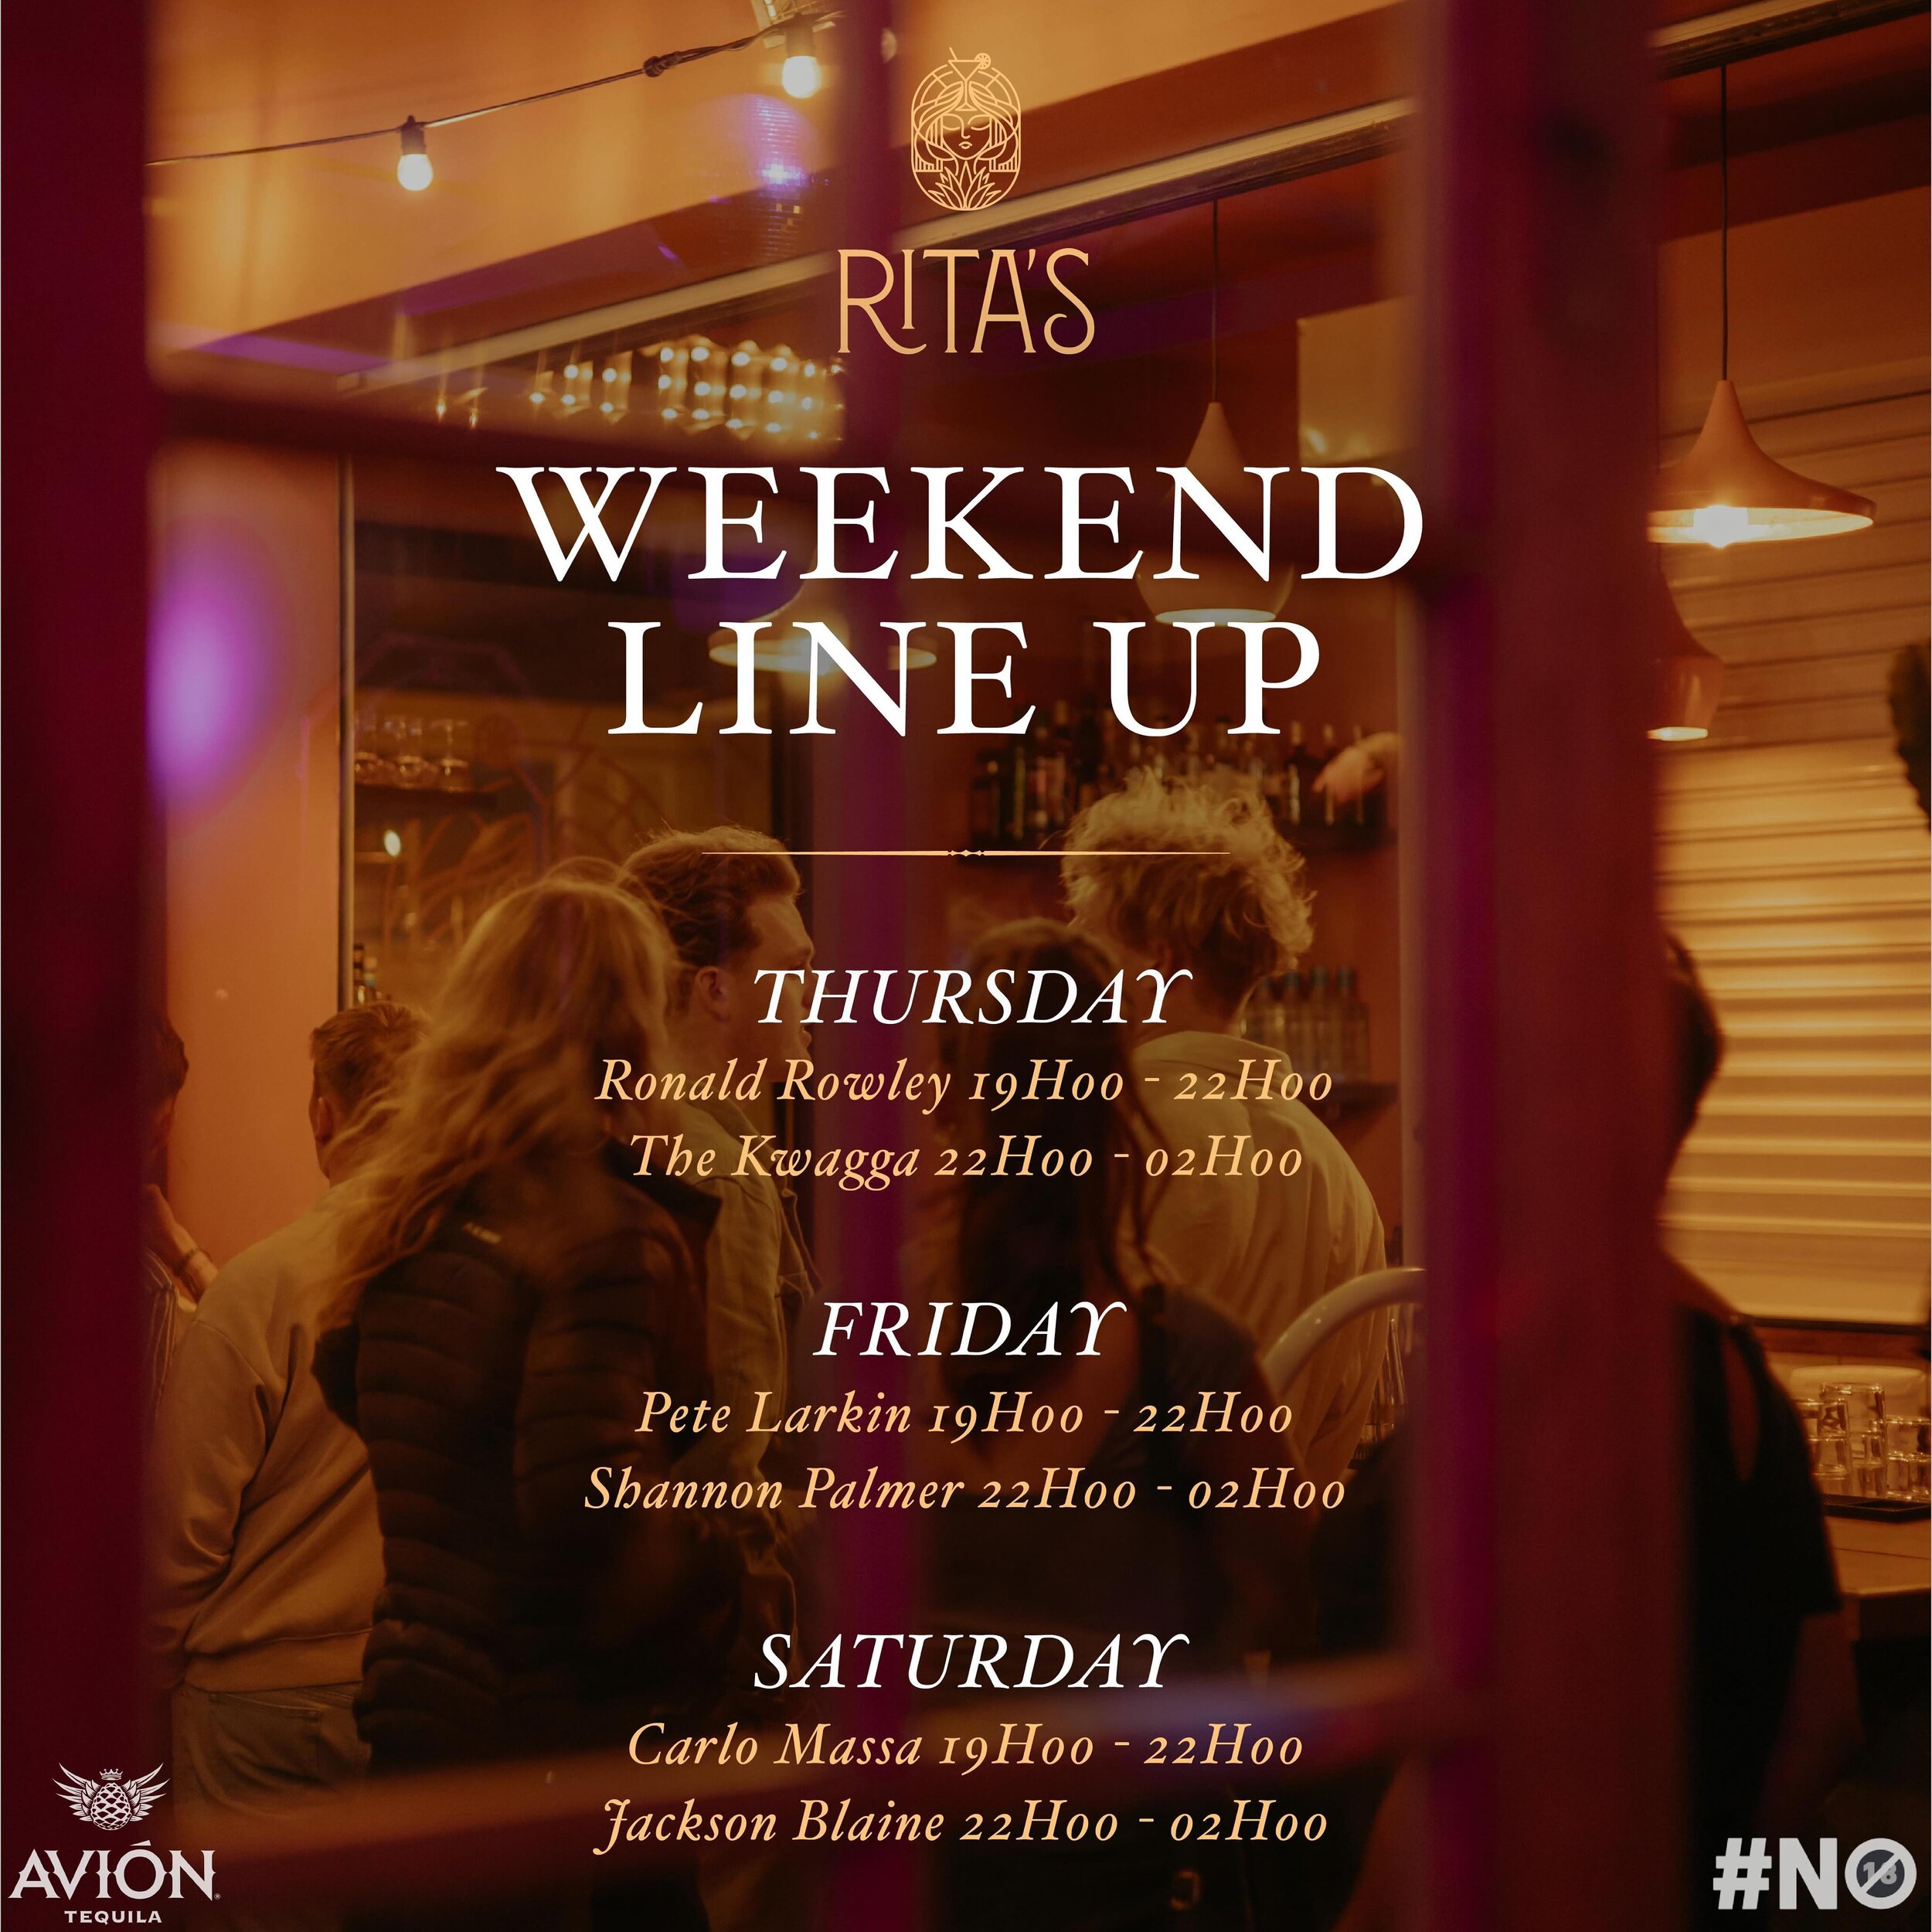 Your long weekend LINE UP✨THURSDAY to SATURDAY ⬇️🪩🍸

Thursday Featuring: 
@ronscones2_ @the_kwagga 

Friday Featuring: 
19H00 @peterlarkinsa 
22H00 Shannon Palmer 

Saturday Featuring: 
19H00 - 22H00 @carlomassadj 
22H00 - close Jackson Blaine 

Ta